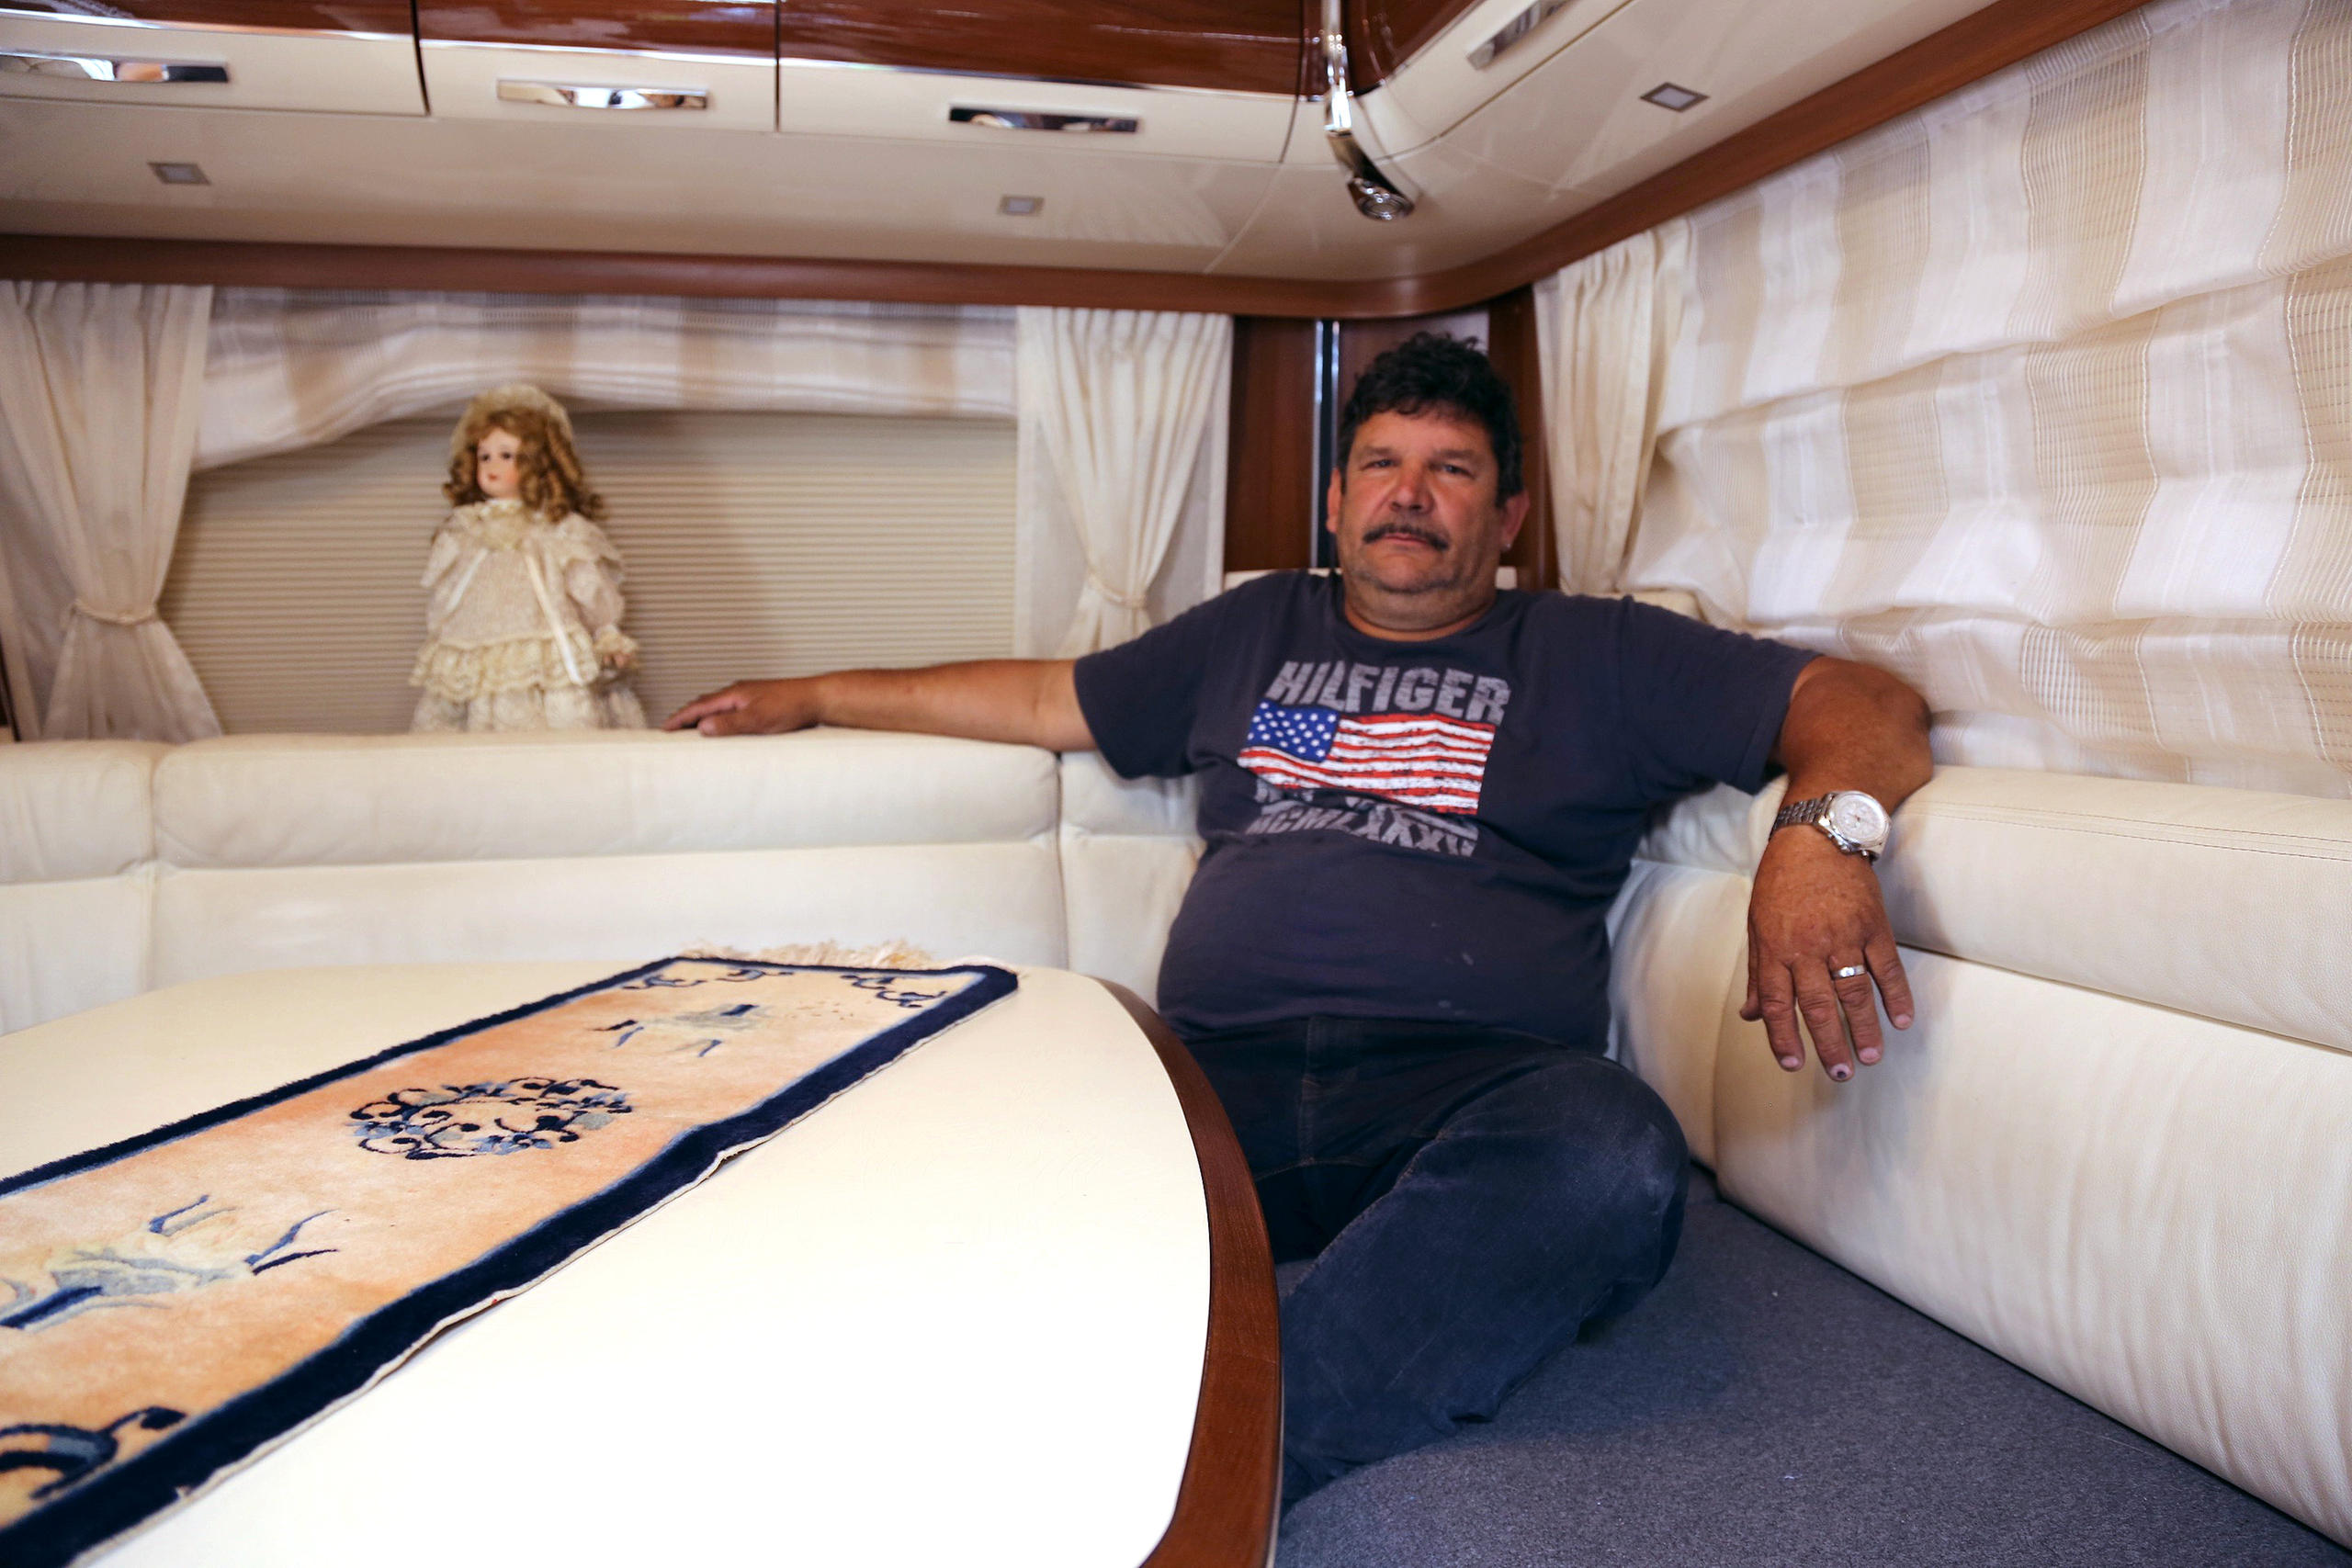 A man sits in a caravan and looks directly at then camera